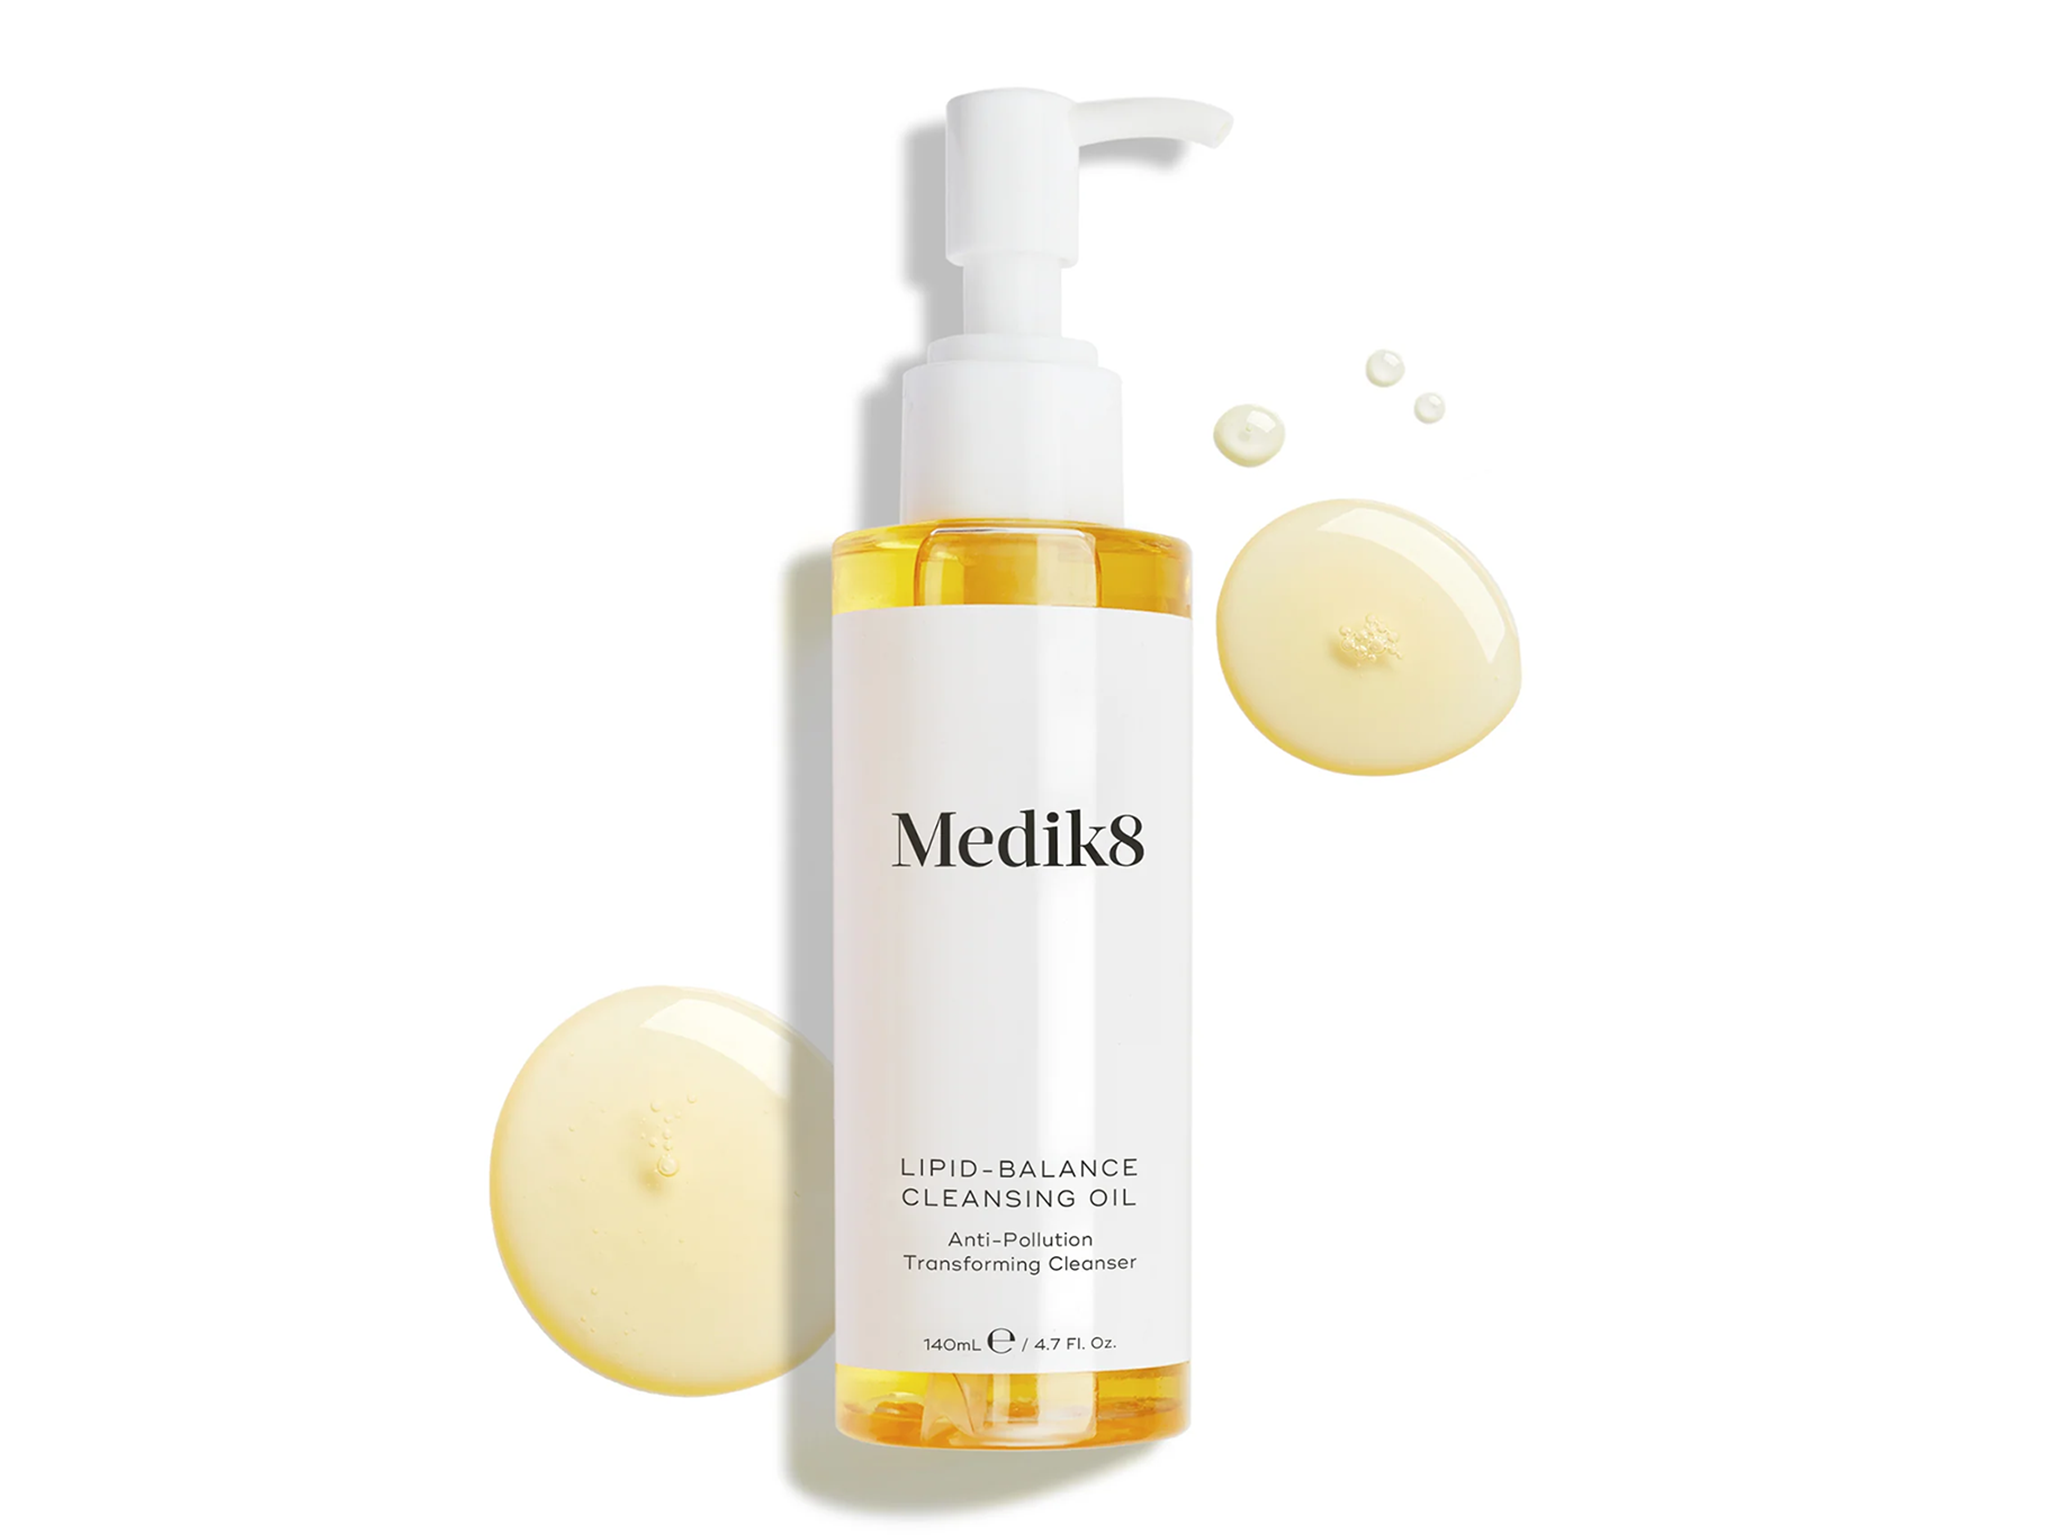 best Medik8 products review tried and tested Medik8 lipid-balance cleansing oil